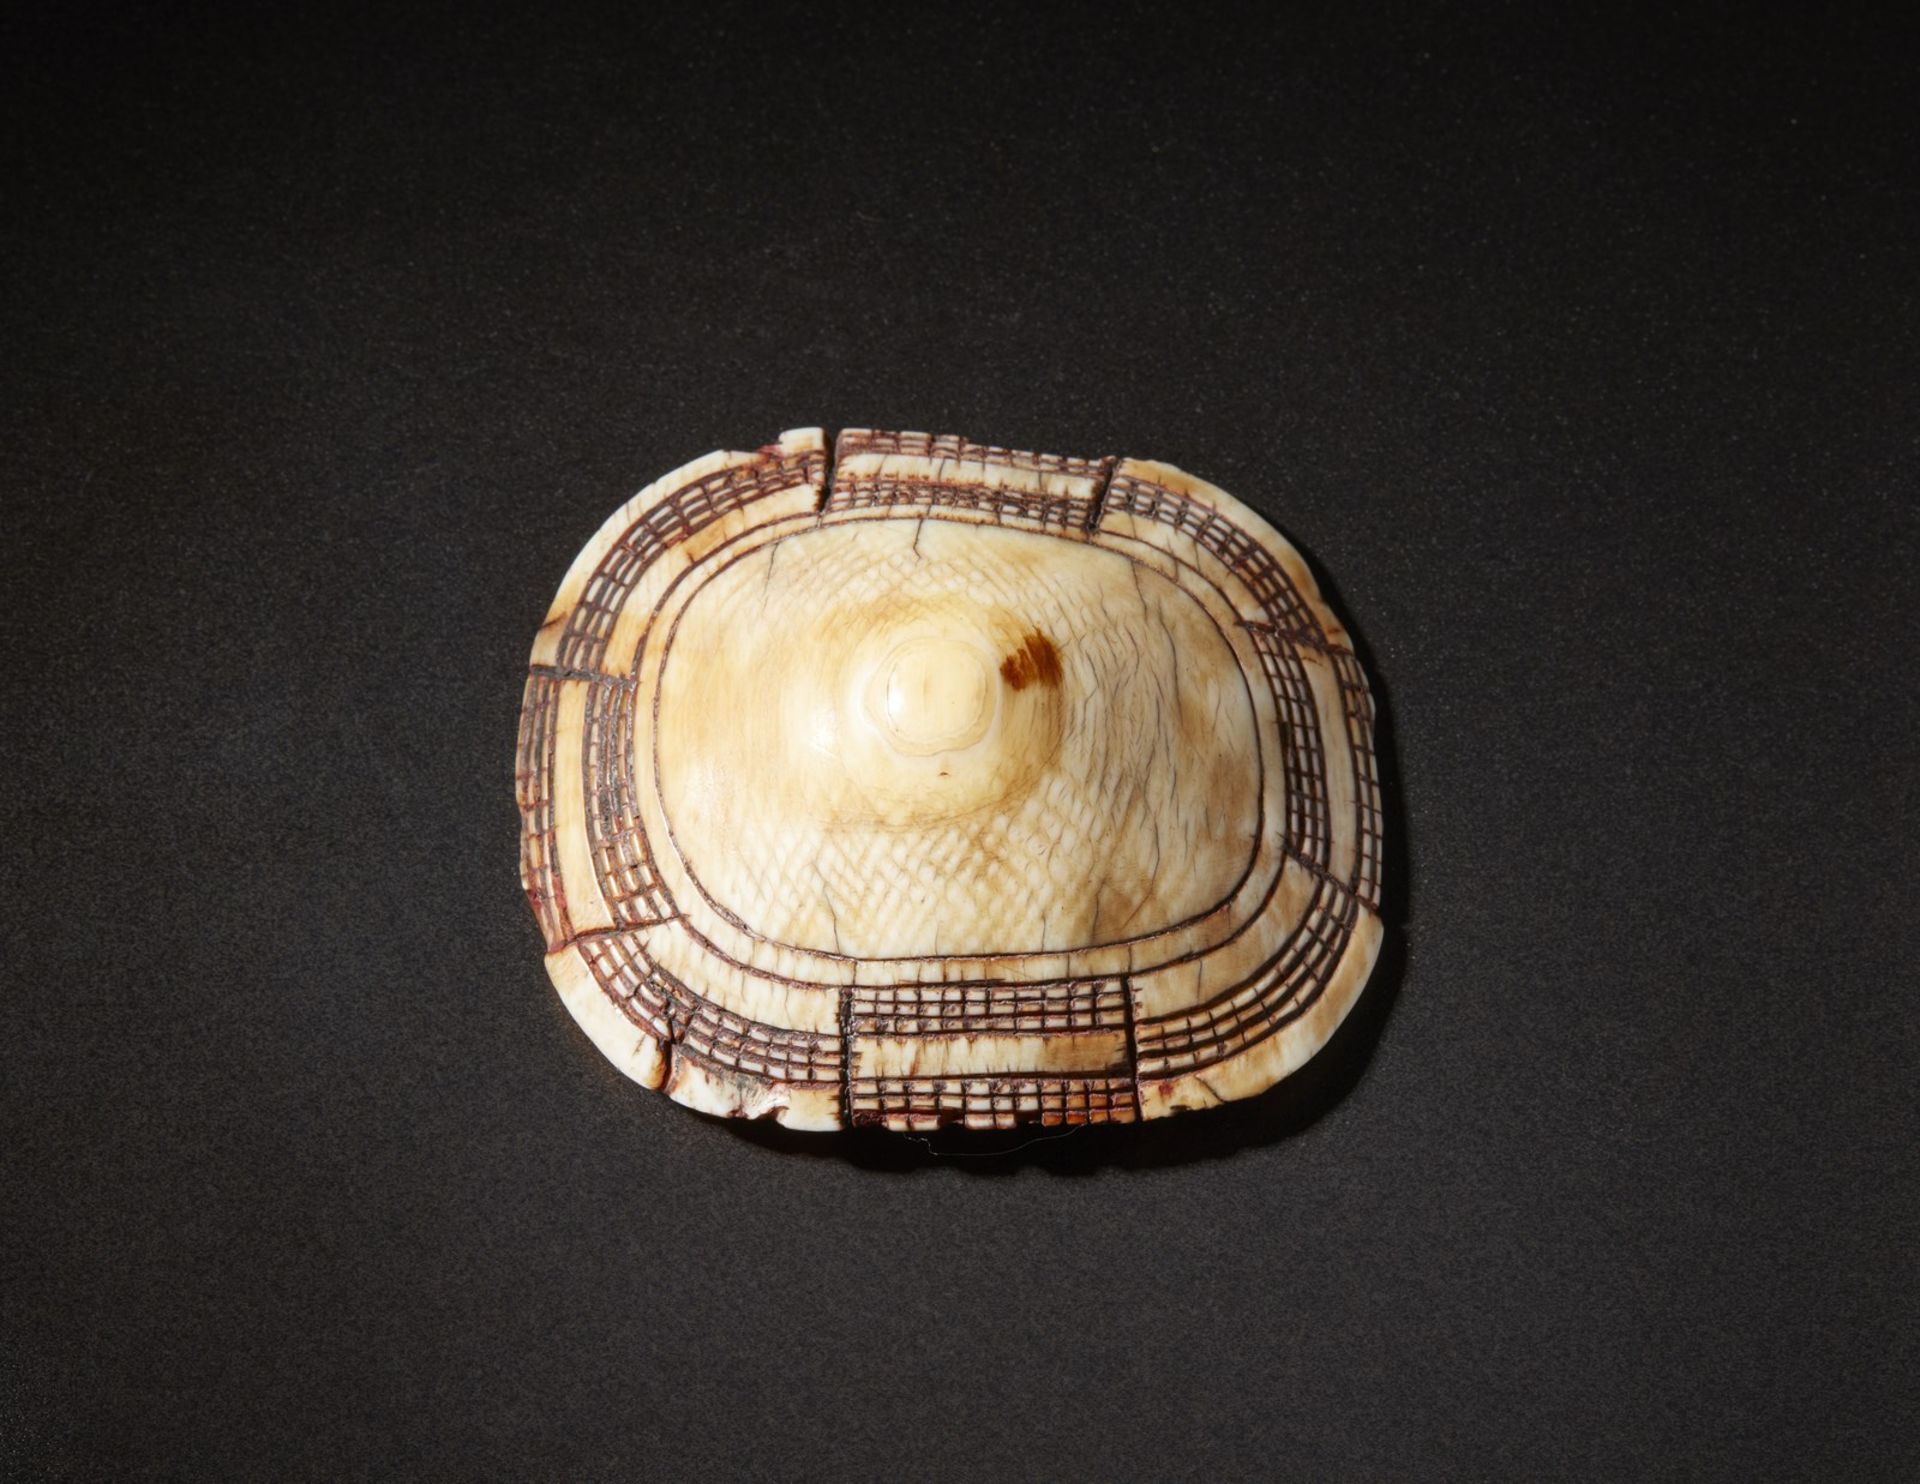 Cuanhama - Namibia  Button or Omakipa.Ivory.Small defects and signs of use.